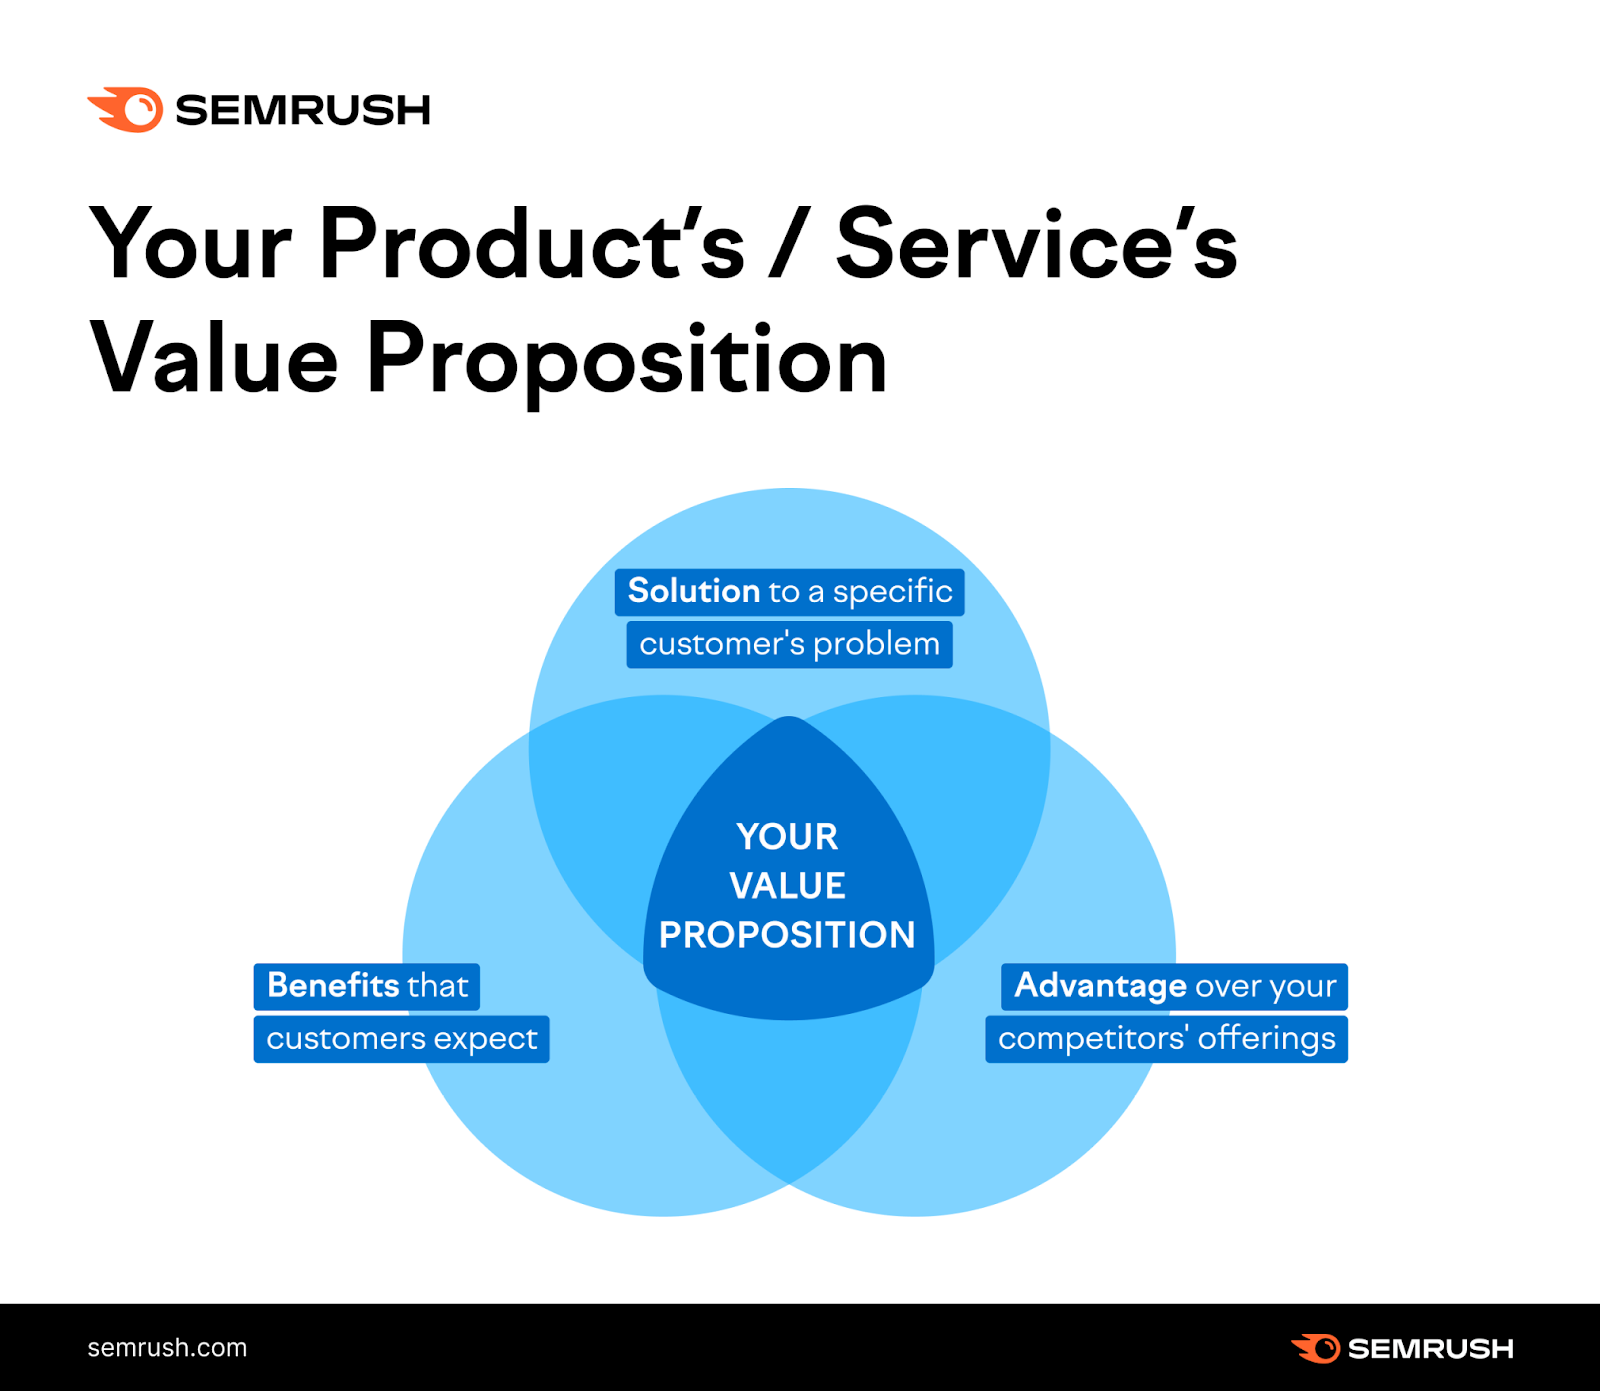 an infographic showing the questions that value proposition addresses